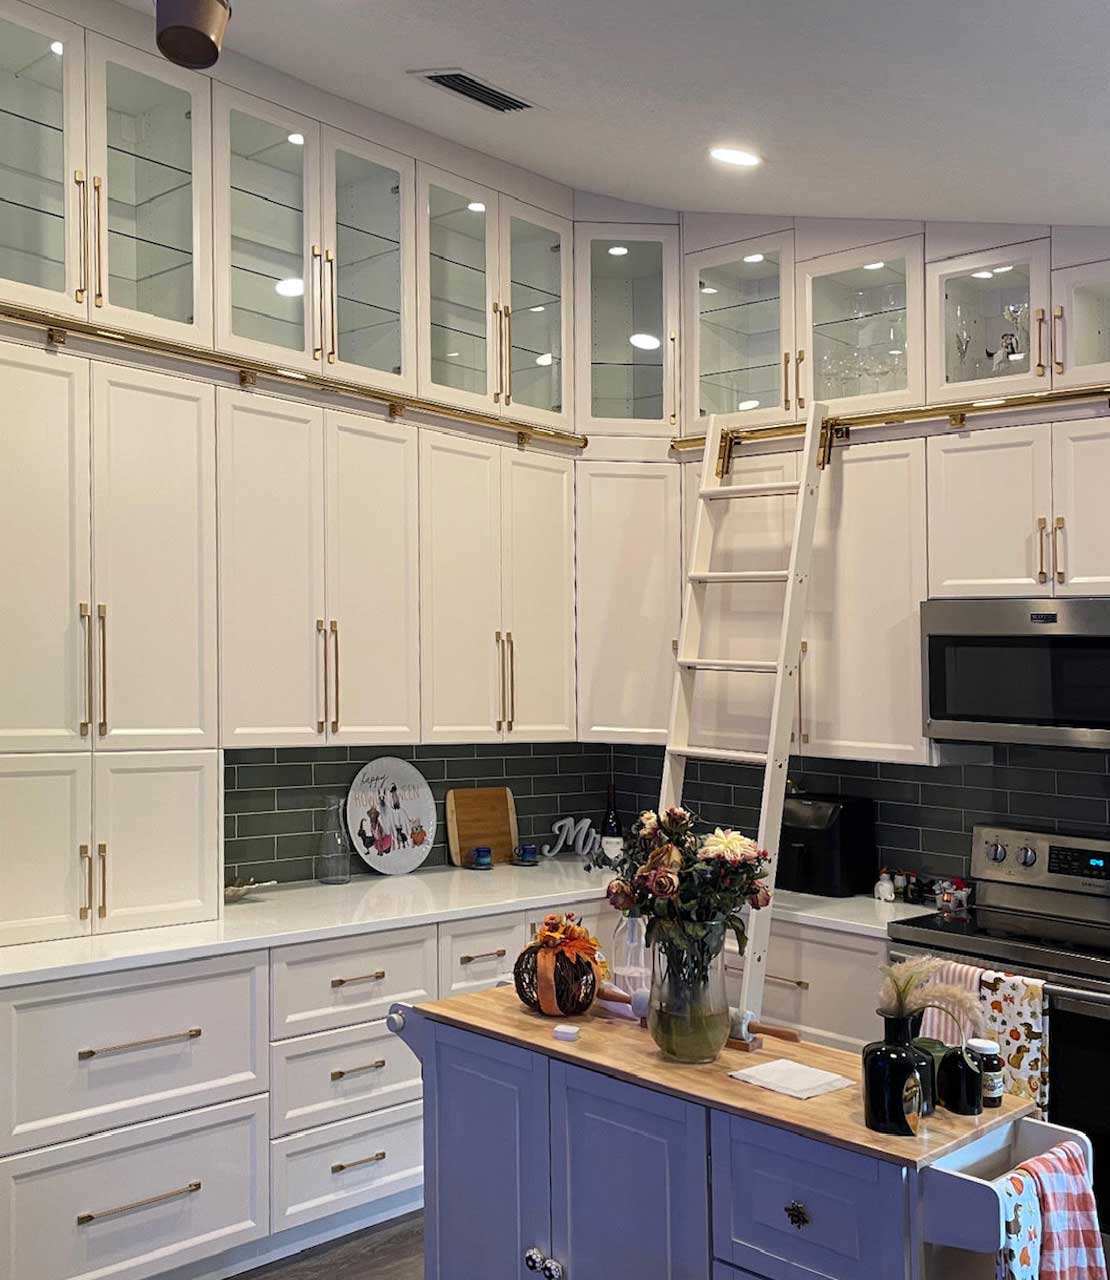 White IKEA cabinets installed in kitchen